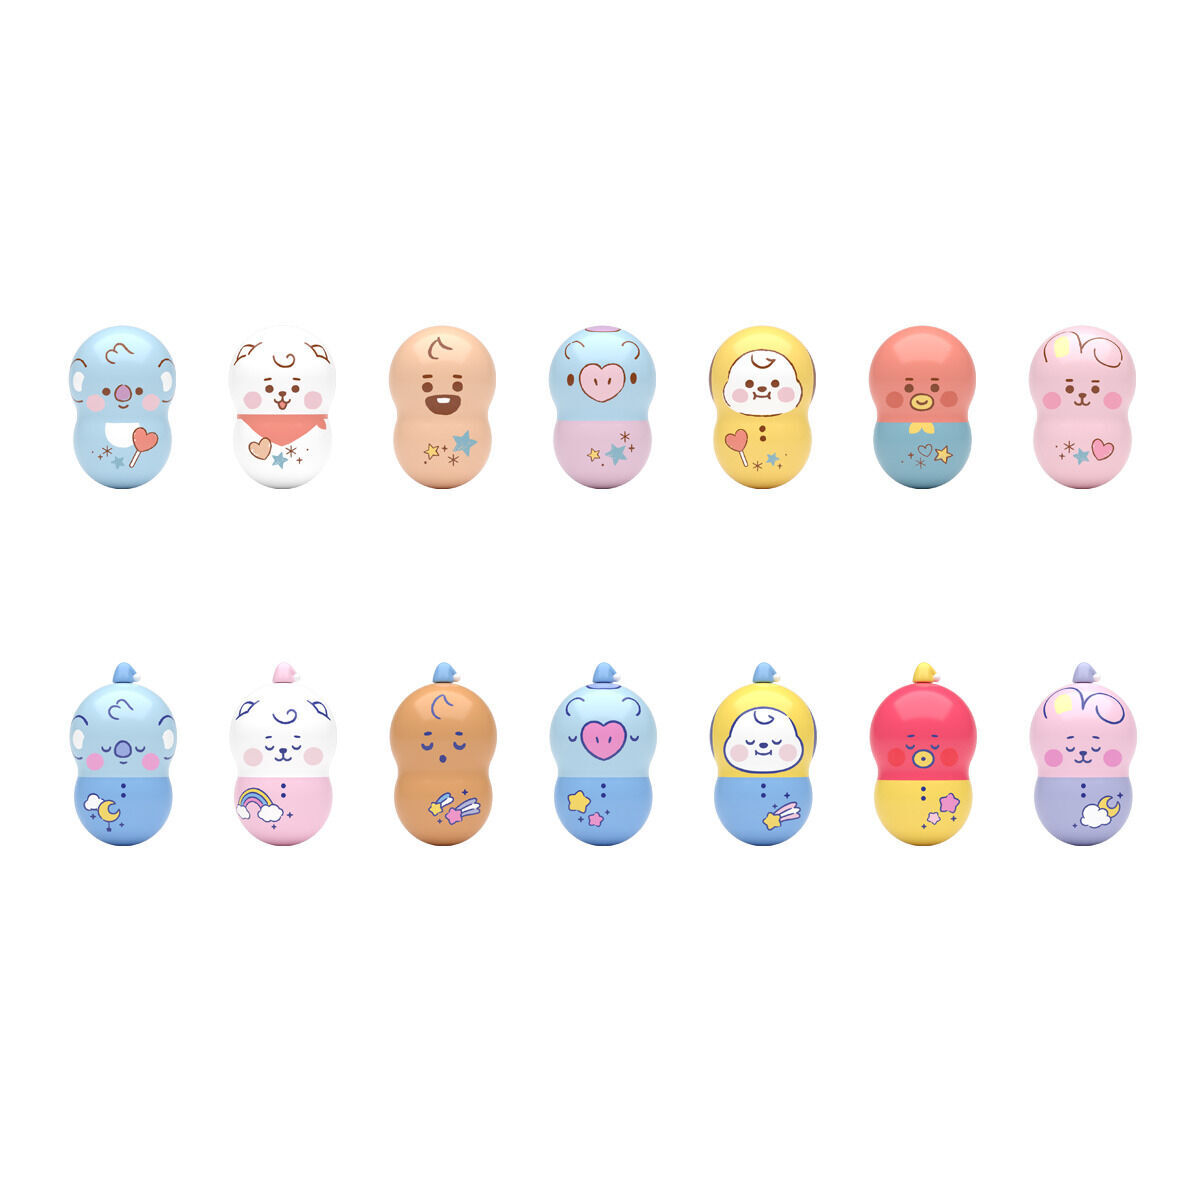 Coo'nuts BT21 BABY(14個入) | フィギュア・プラモデル・プラキット